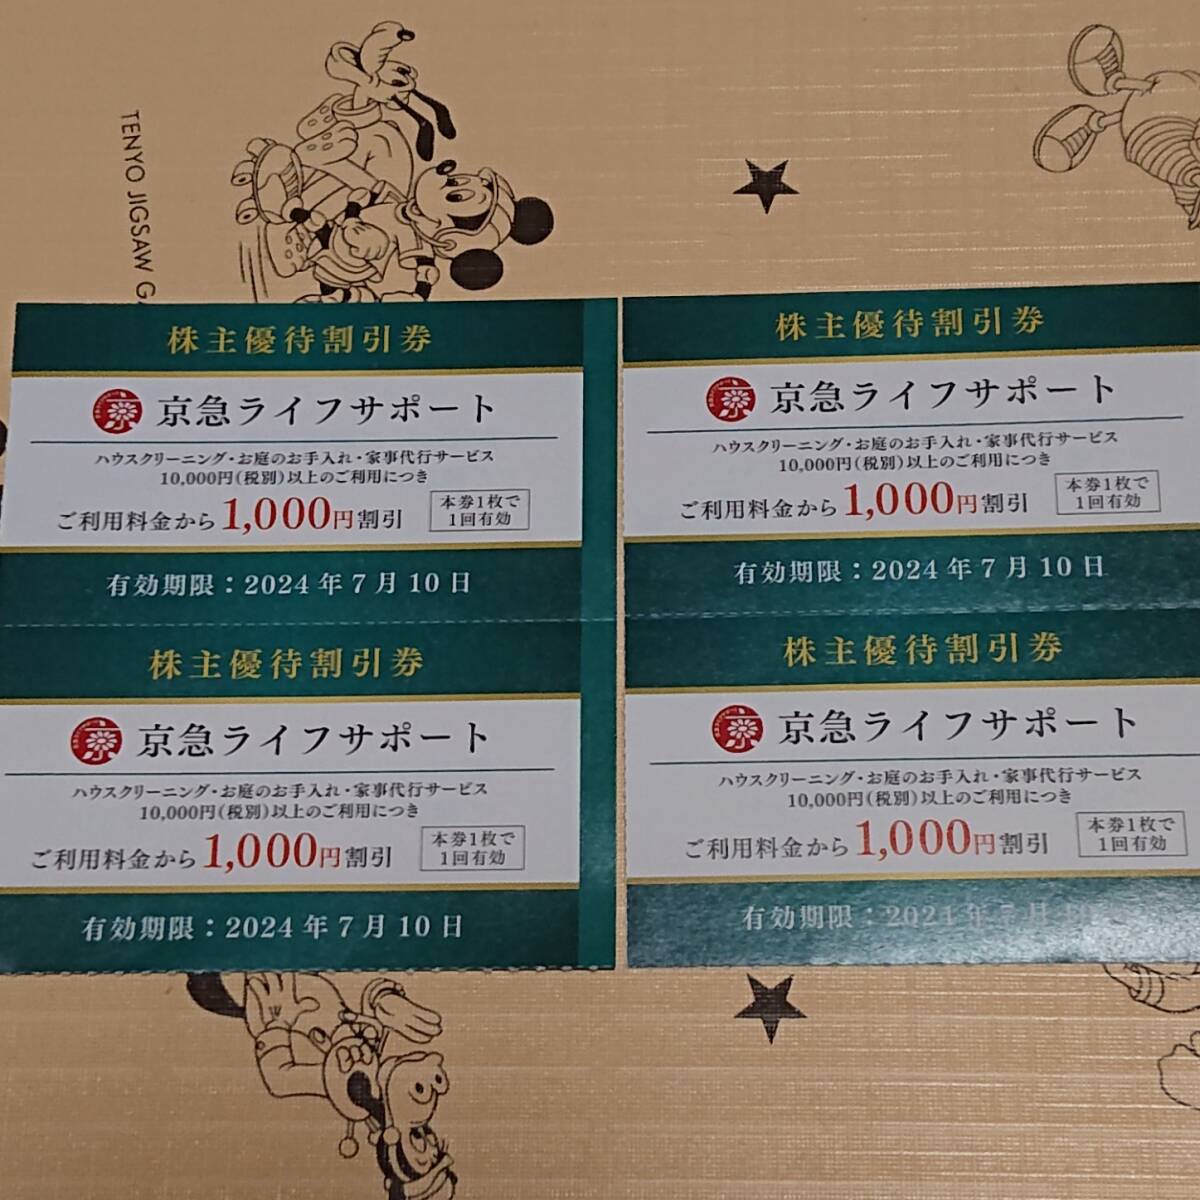 * capital sudden life support 1000 jpy discount ticket 4 sheets 